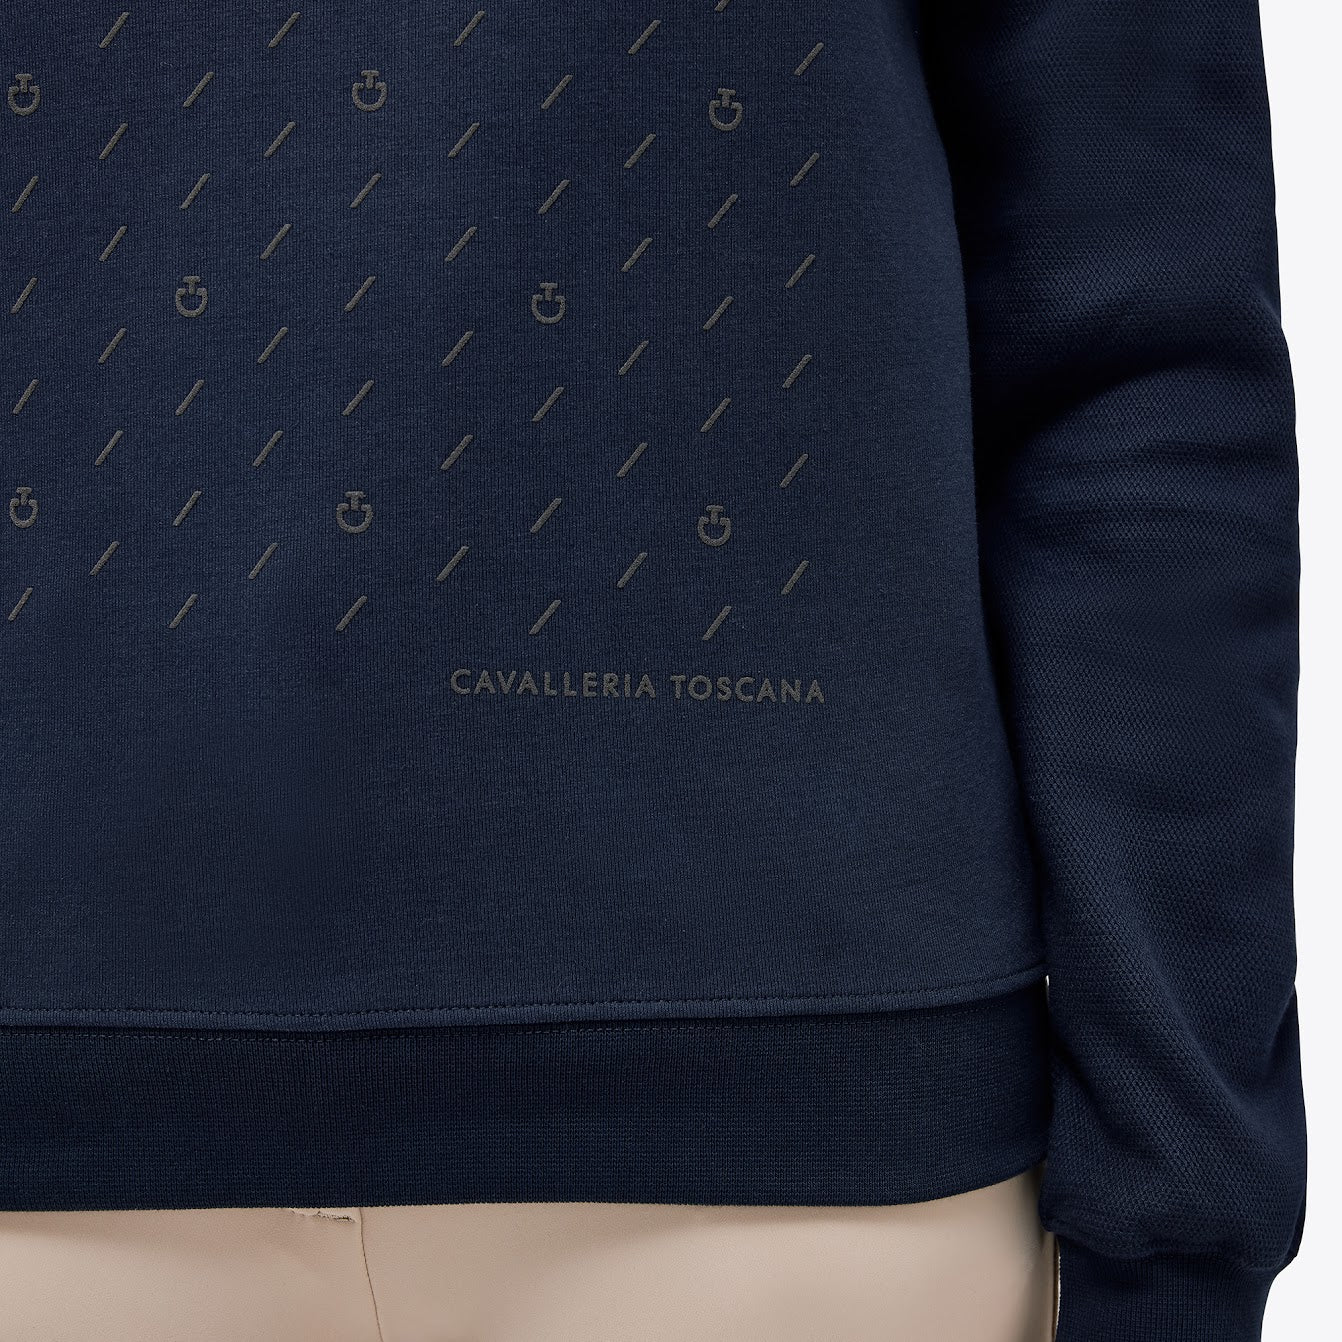 Cavalleria Toscana Dash Cotton Piqué Crew Neck Sweatshirt Has a self coloured CT logo design on the front. Made from soft jersey. Great for at the shows or on the yard. 